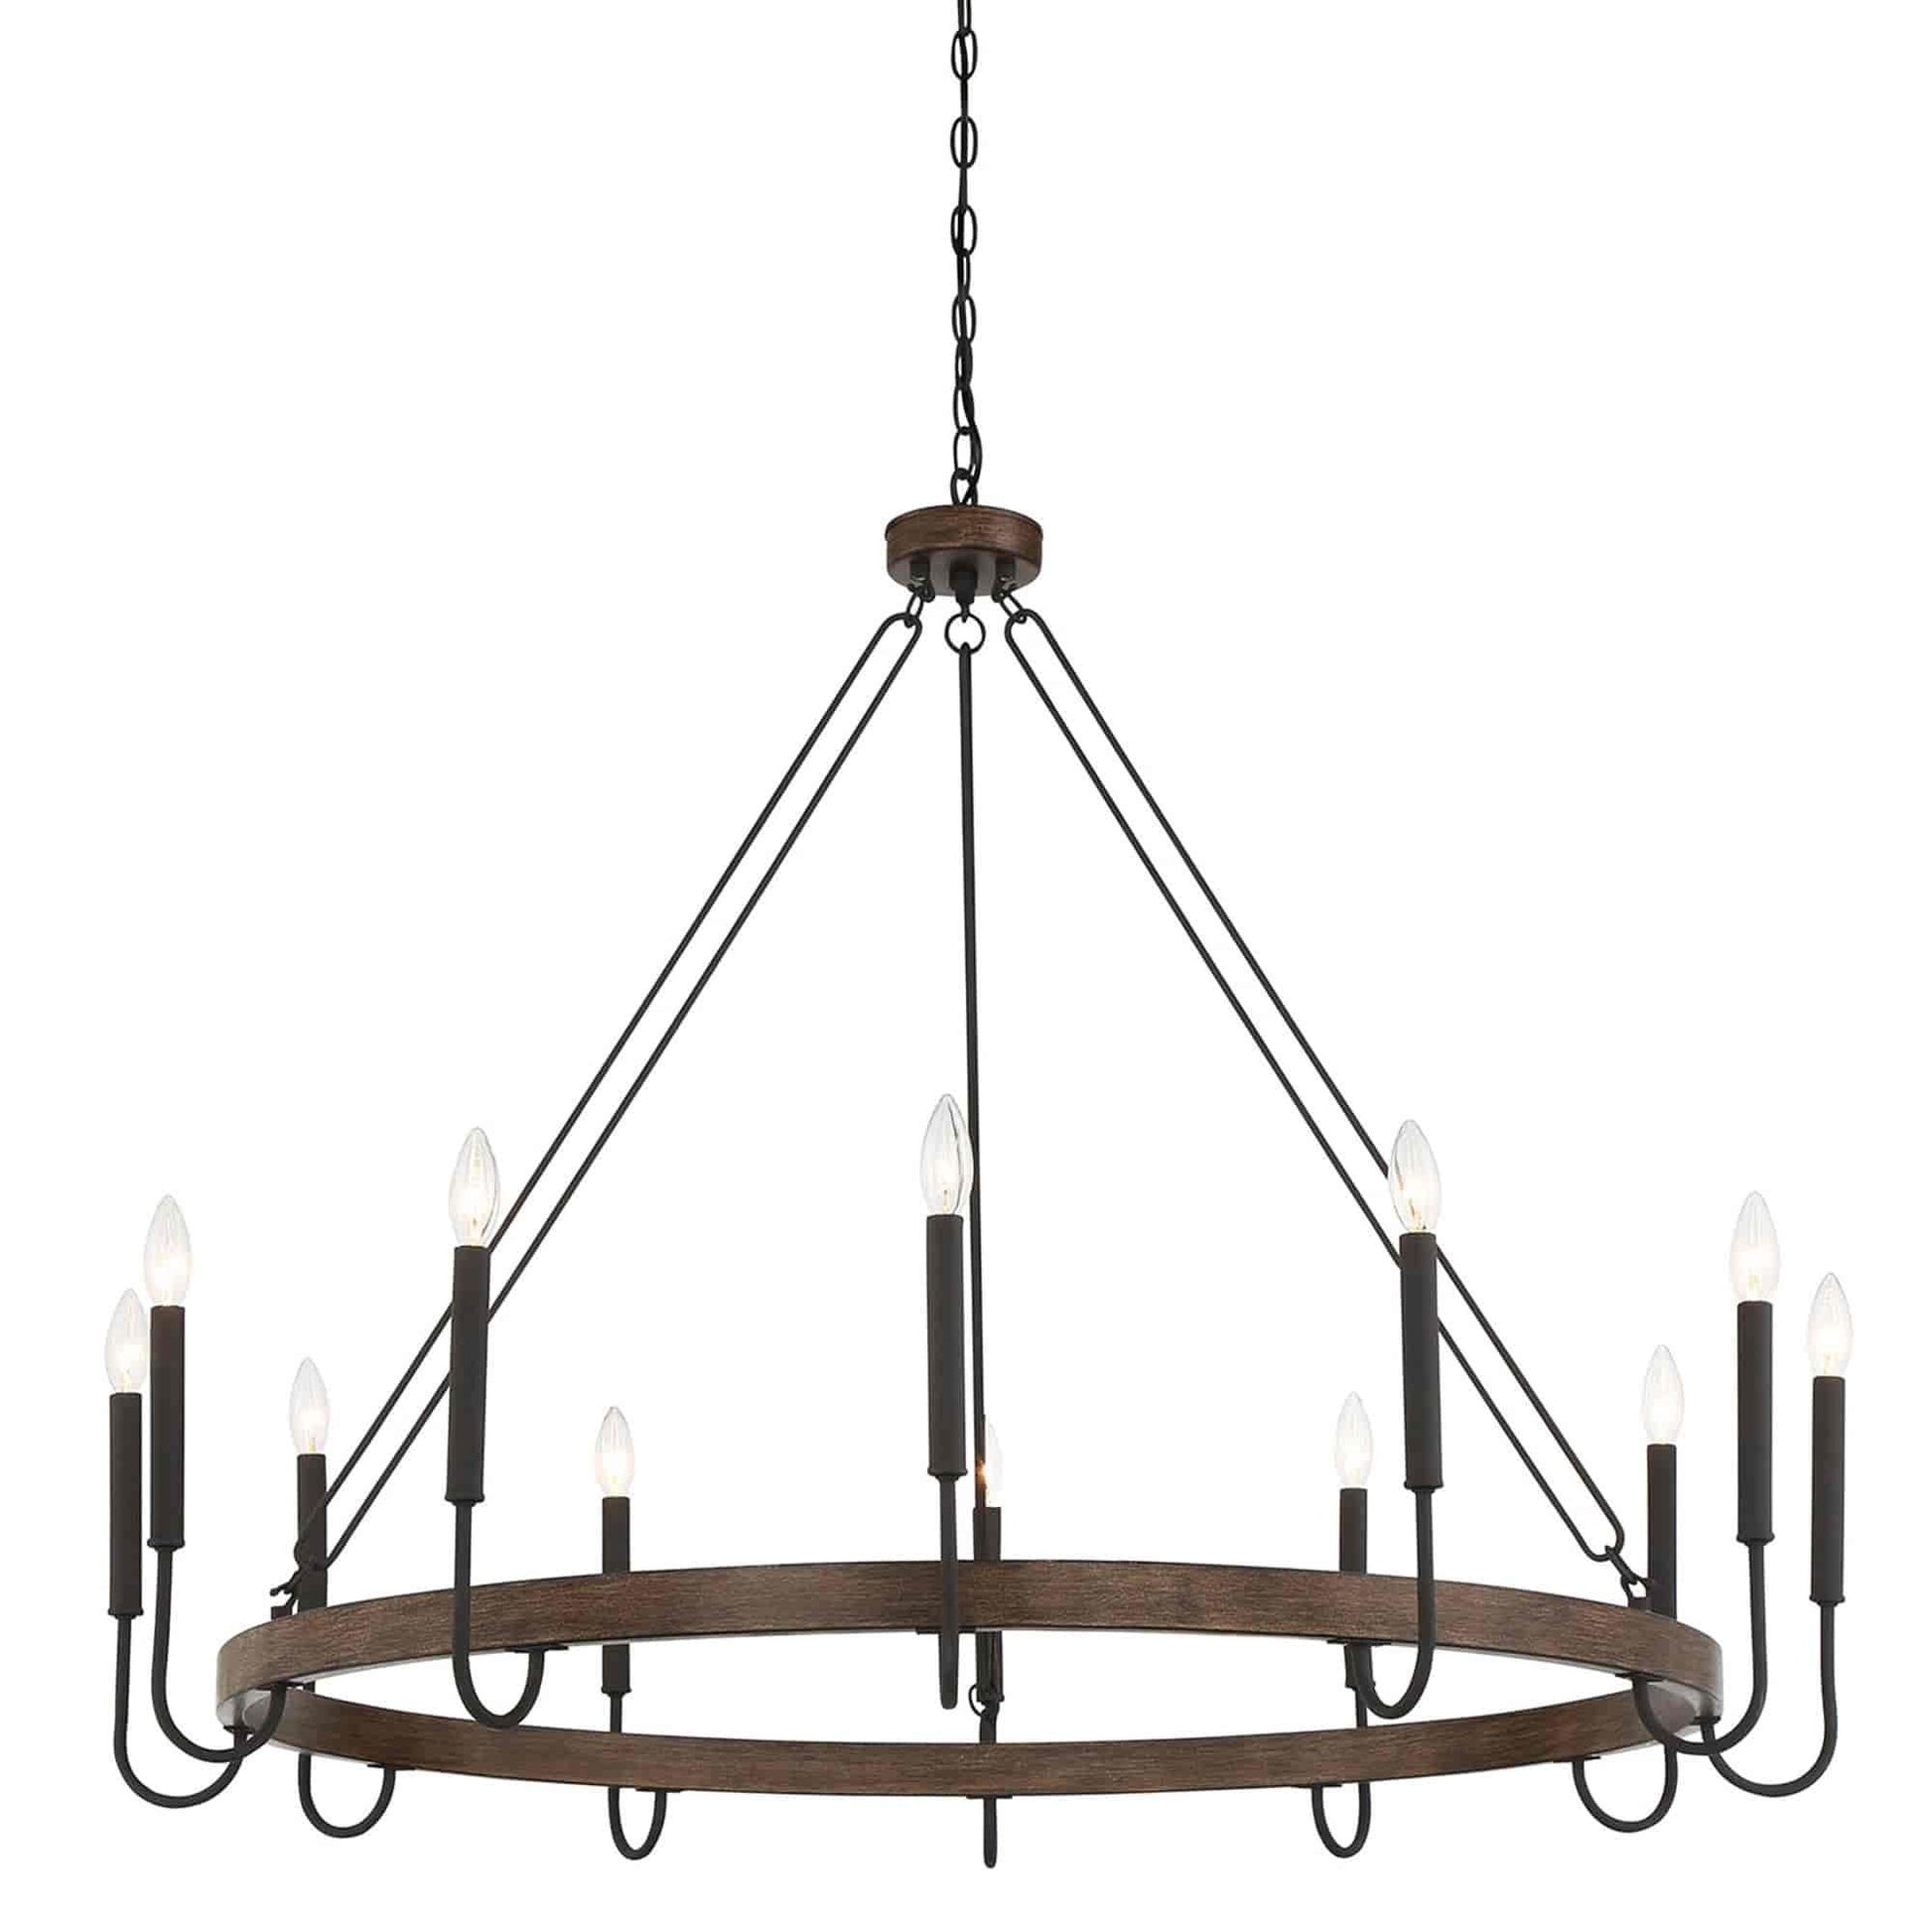 12 light candle style wagon wheel chain chandelier (18) by ACROMA